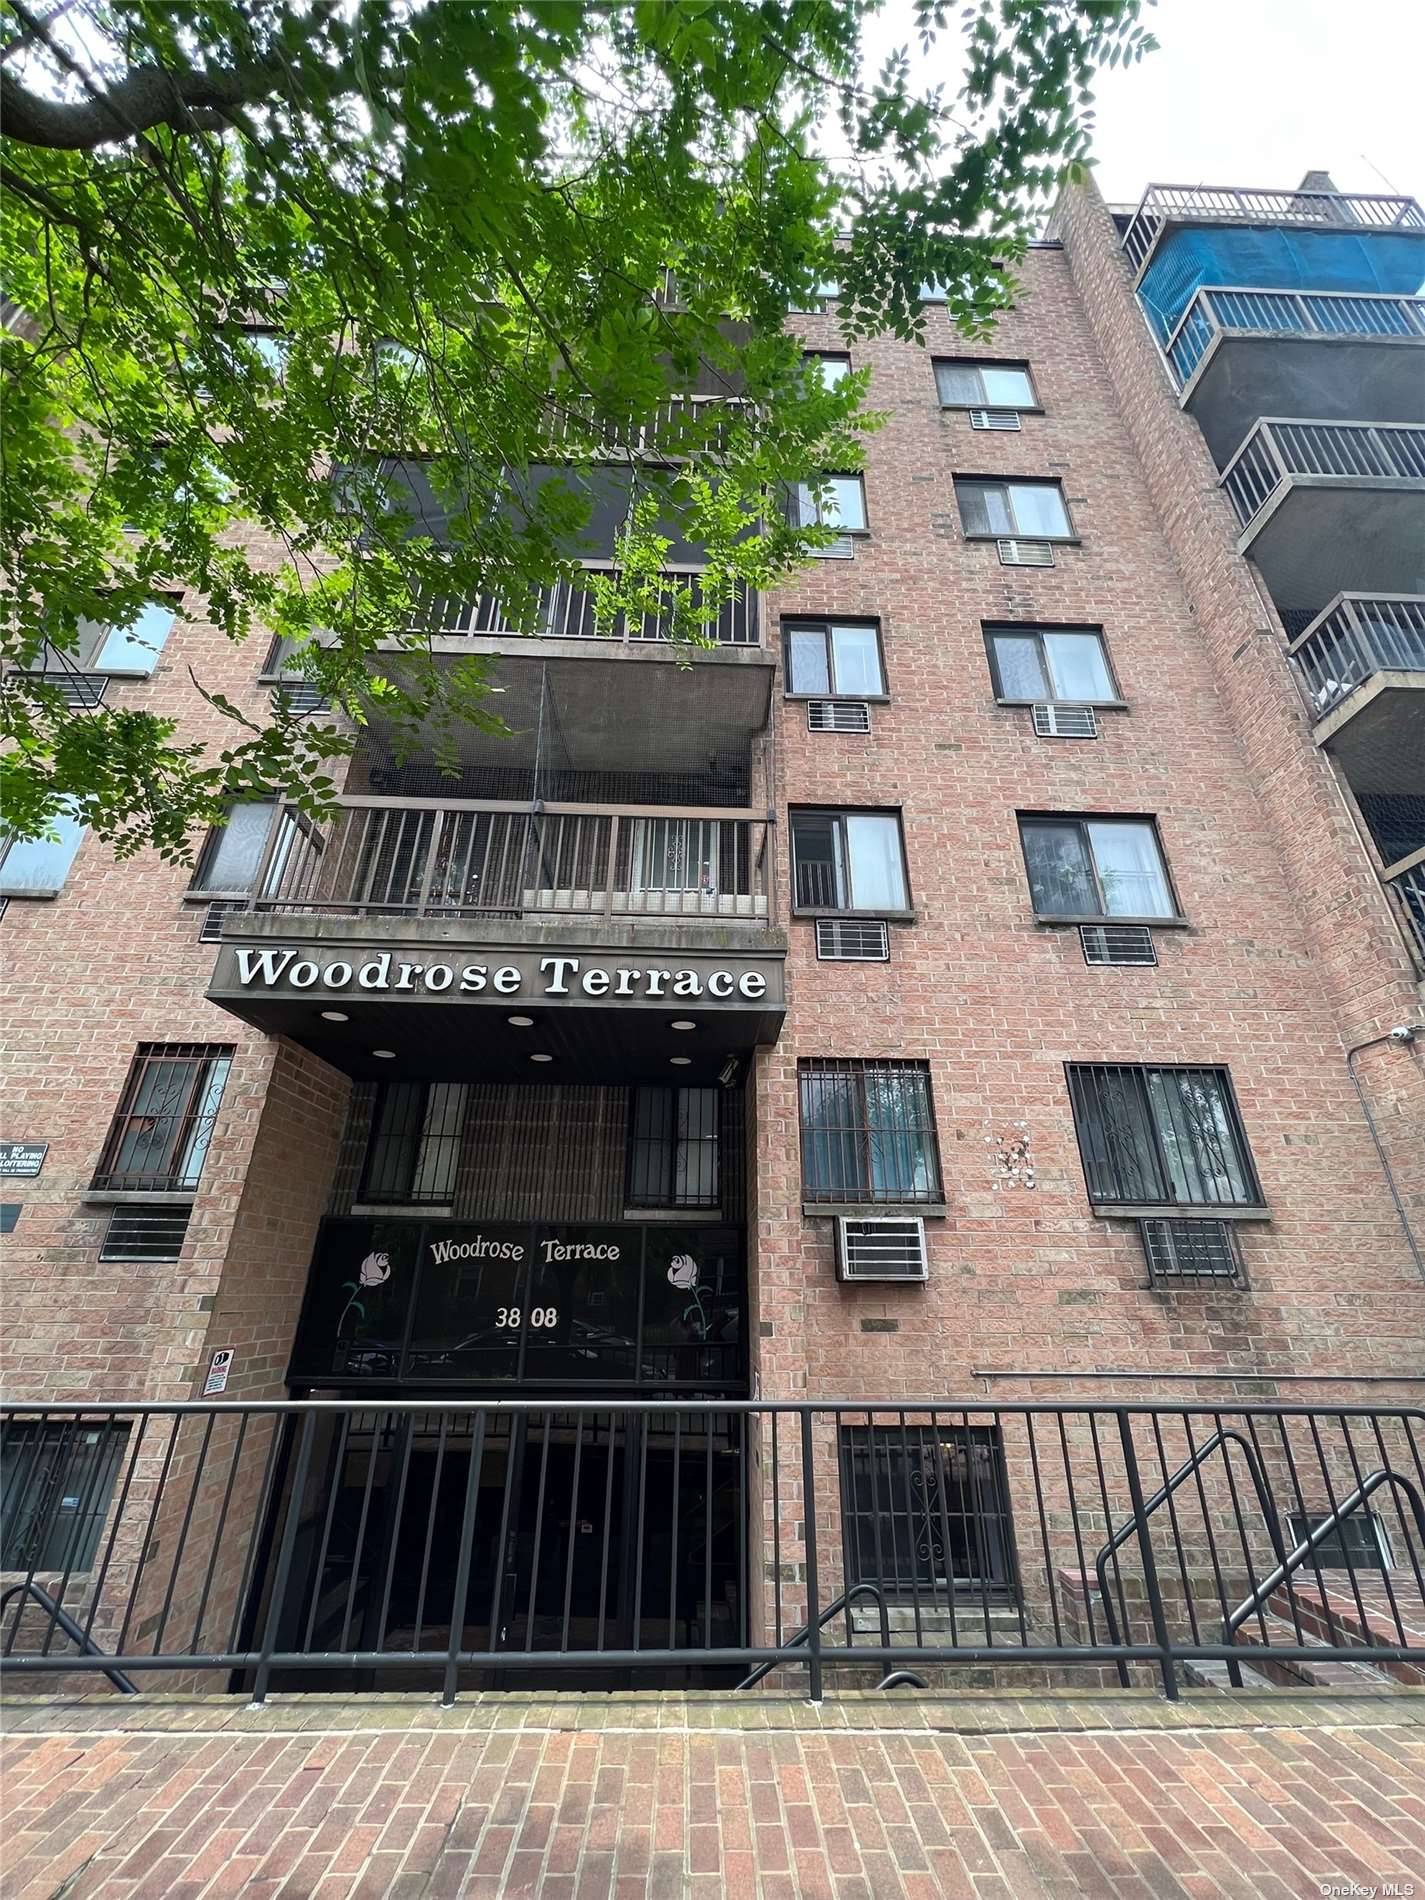 Large 1100. sqft condominium nearby downtown flushing12 minutes to the 7 subway 7 minutes to lirr murray hill station.